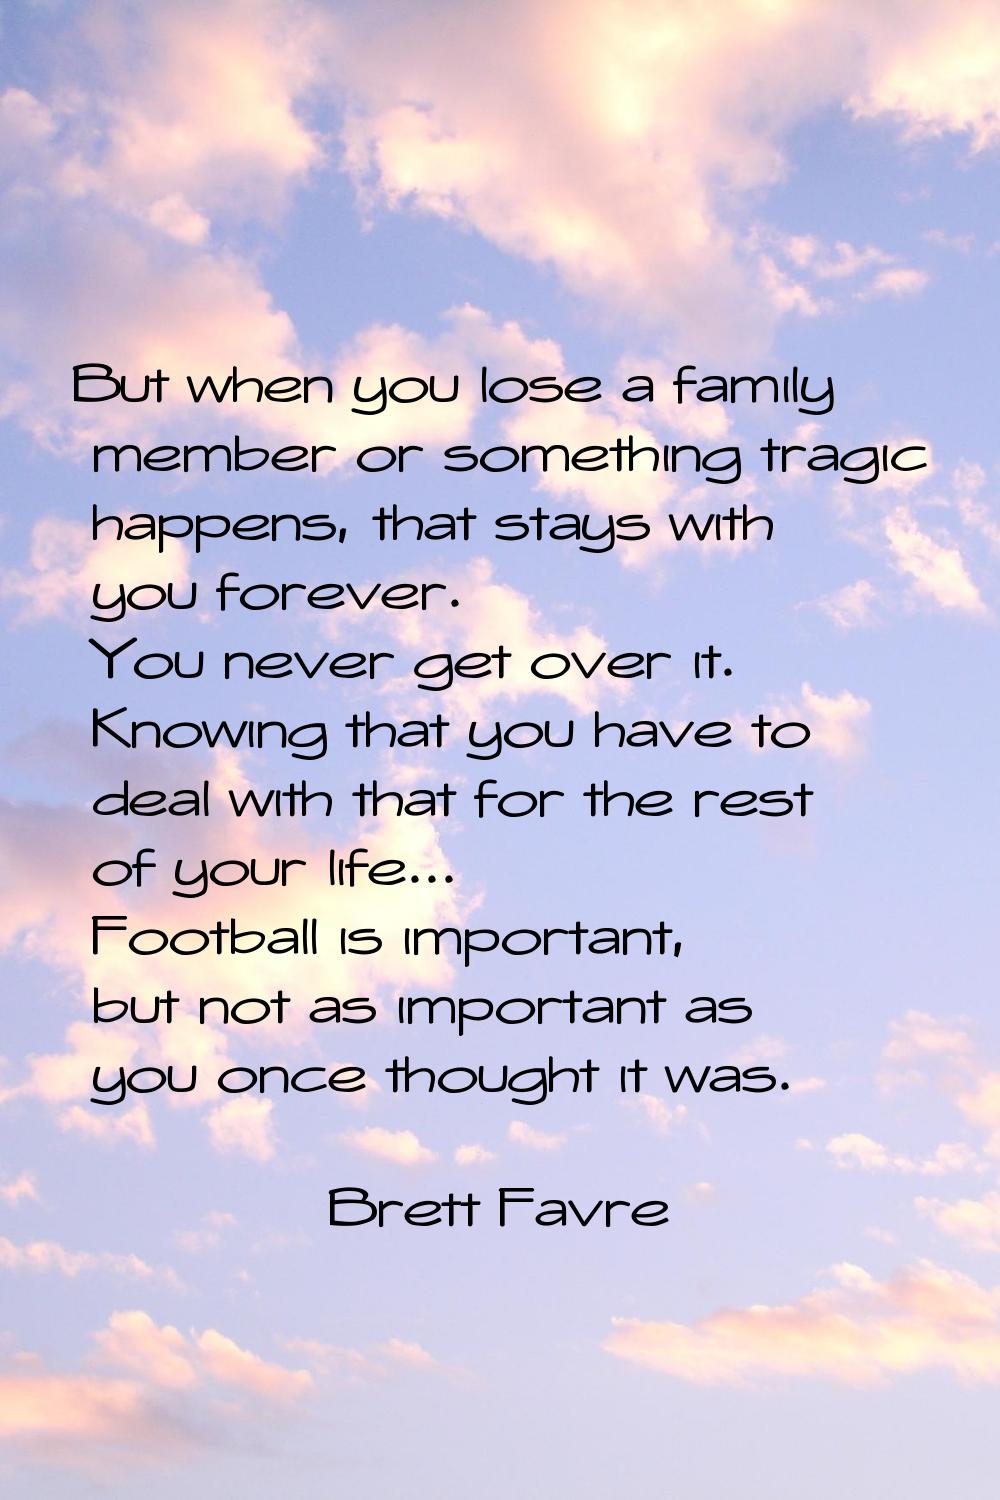 But when you lose a family member or something tragic happens, that stays with you forever. You nev